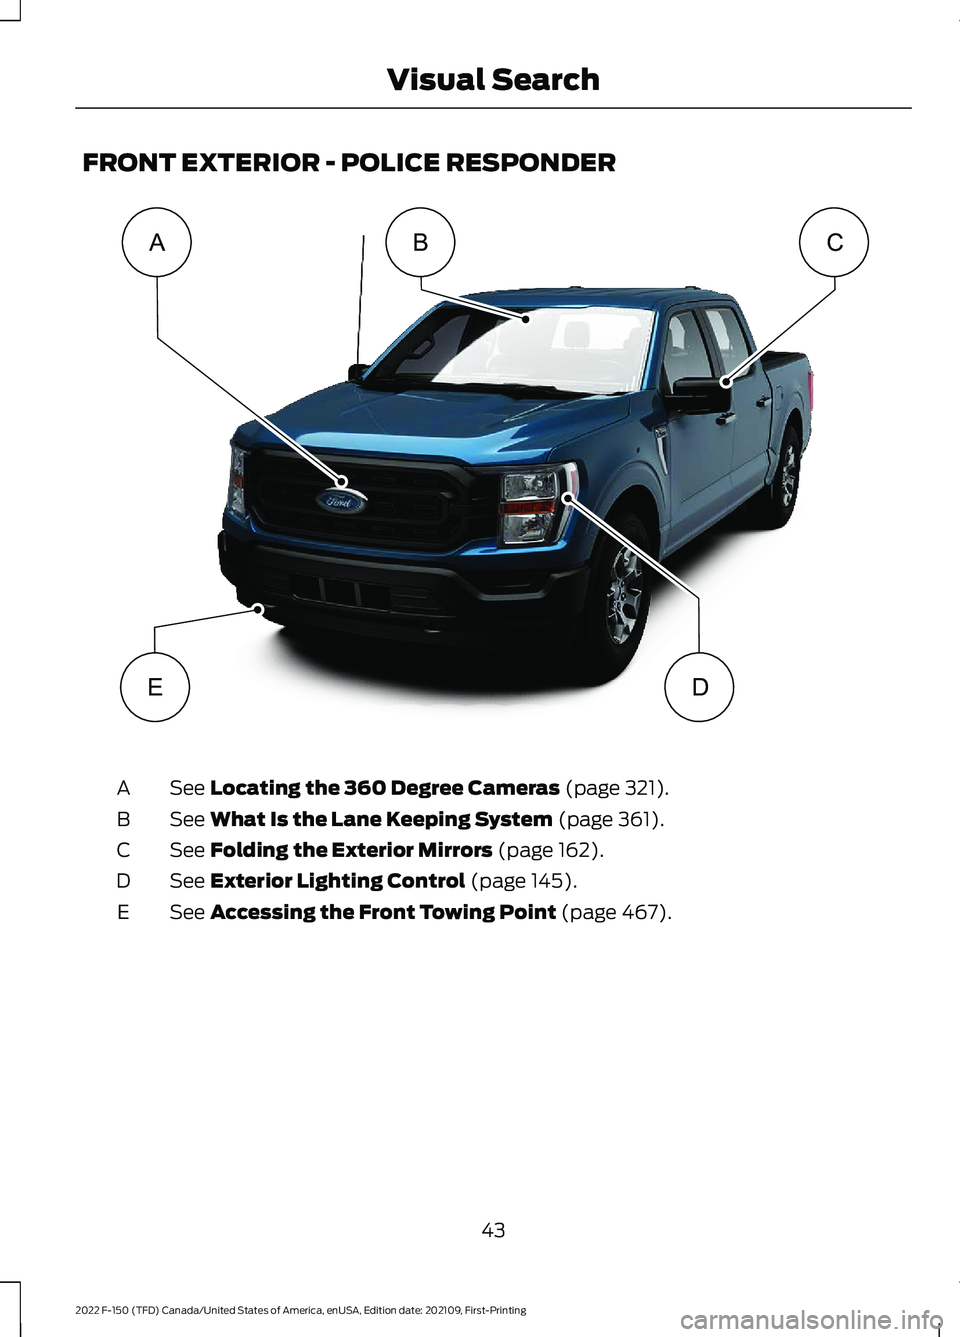 FORD F-150 2022 Service Manual FRONT EXTERIOR - POLICE RESPONDER
See Locating the 360 Degree Cameras (page 321).
A
See 
What Is the Lane Keeping System (page 361).
B
See 
Folding the Exterior Mirrors (page 162).
C
See 
Exterior Lig